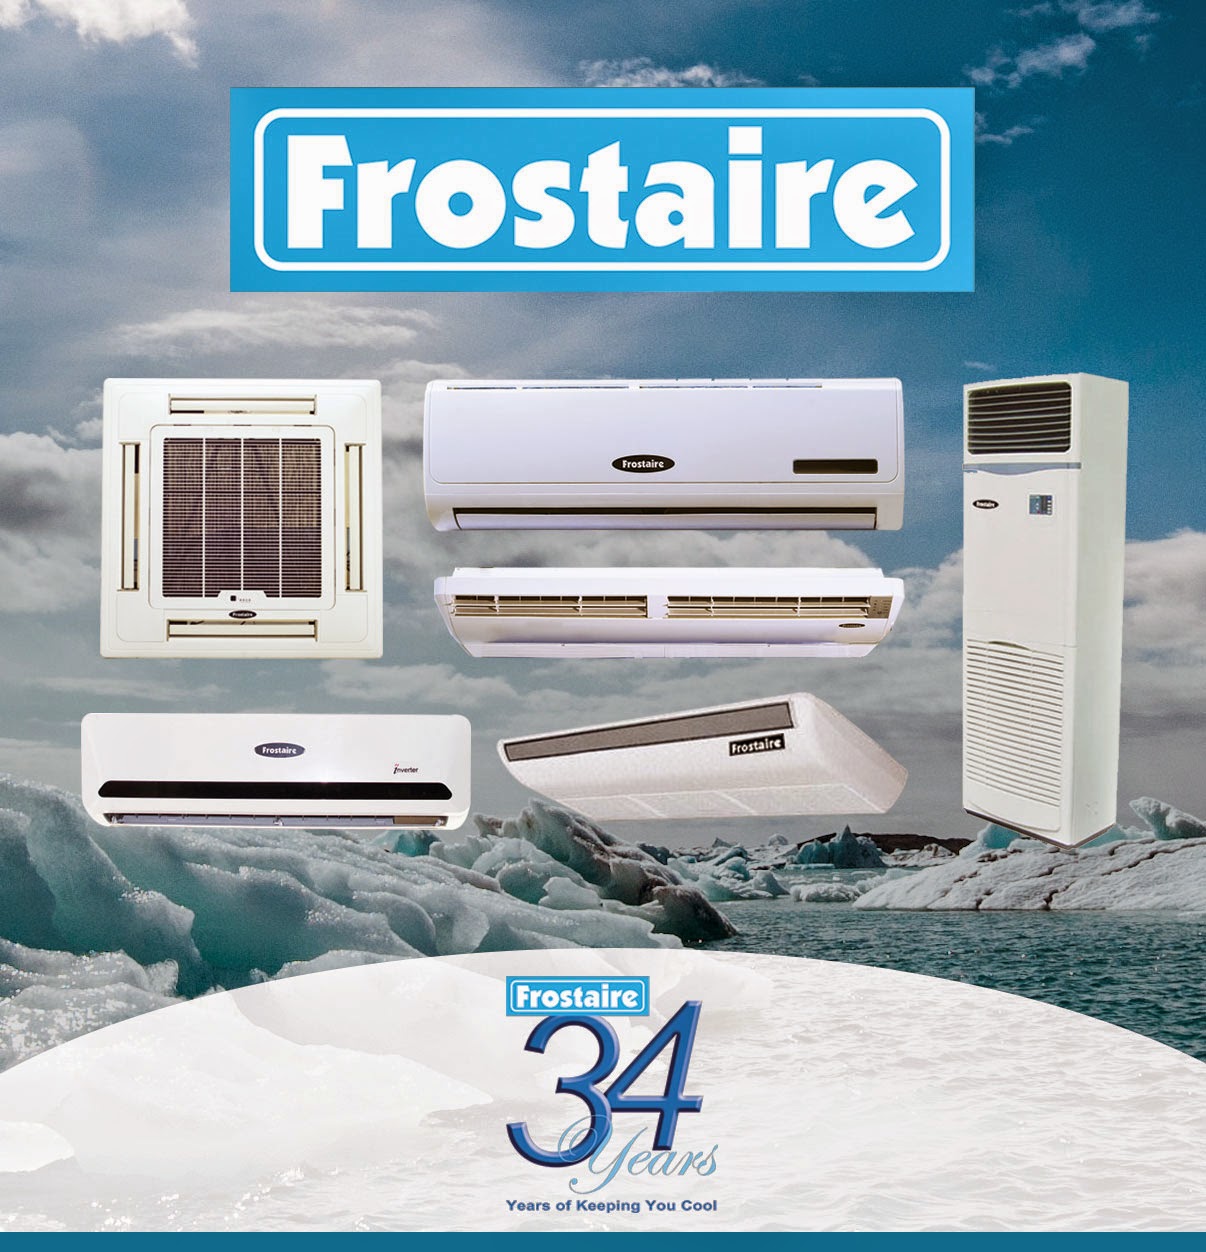 Frostaire product range